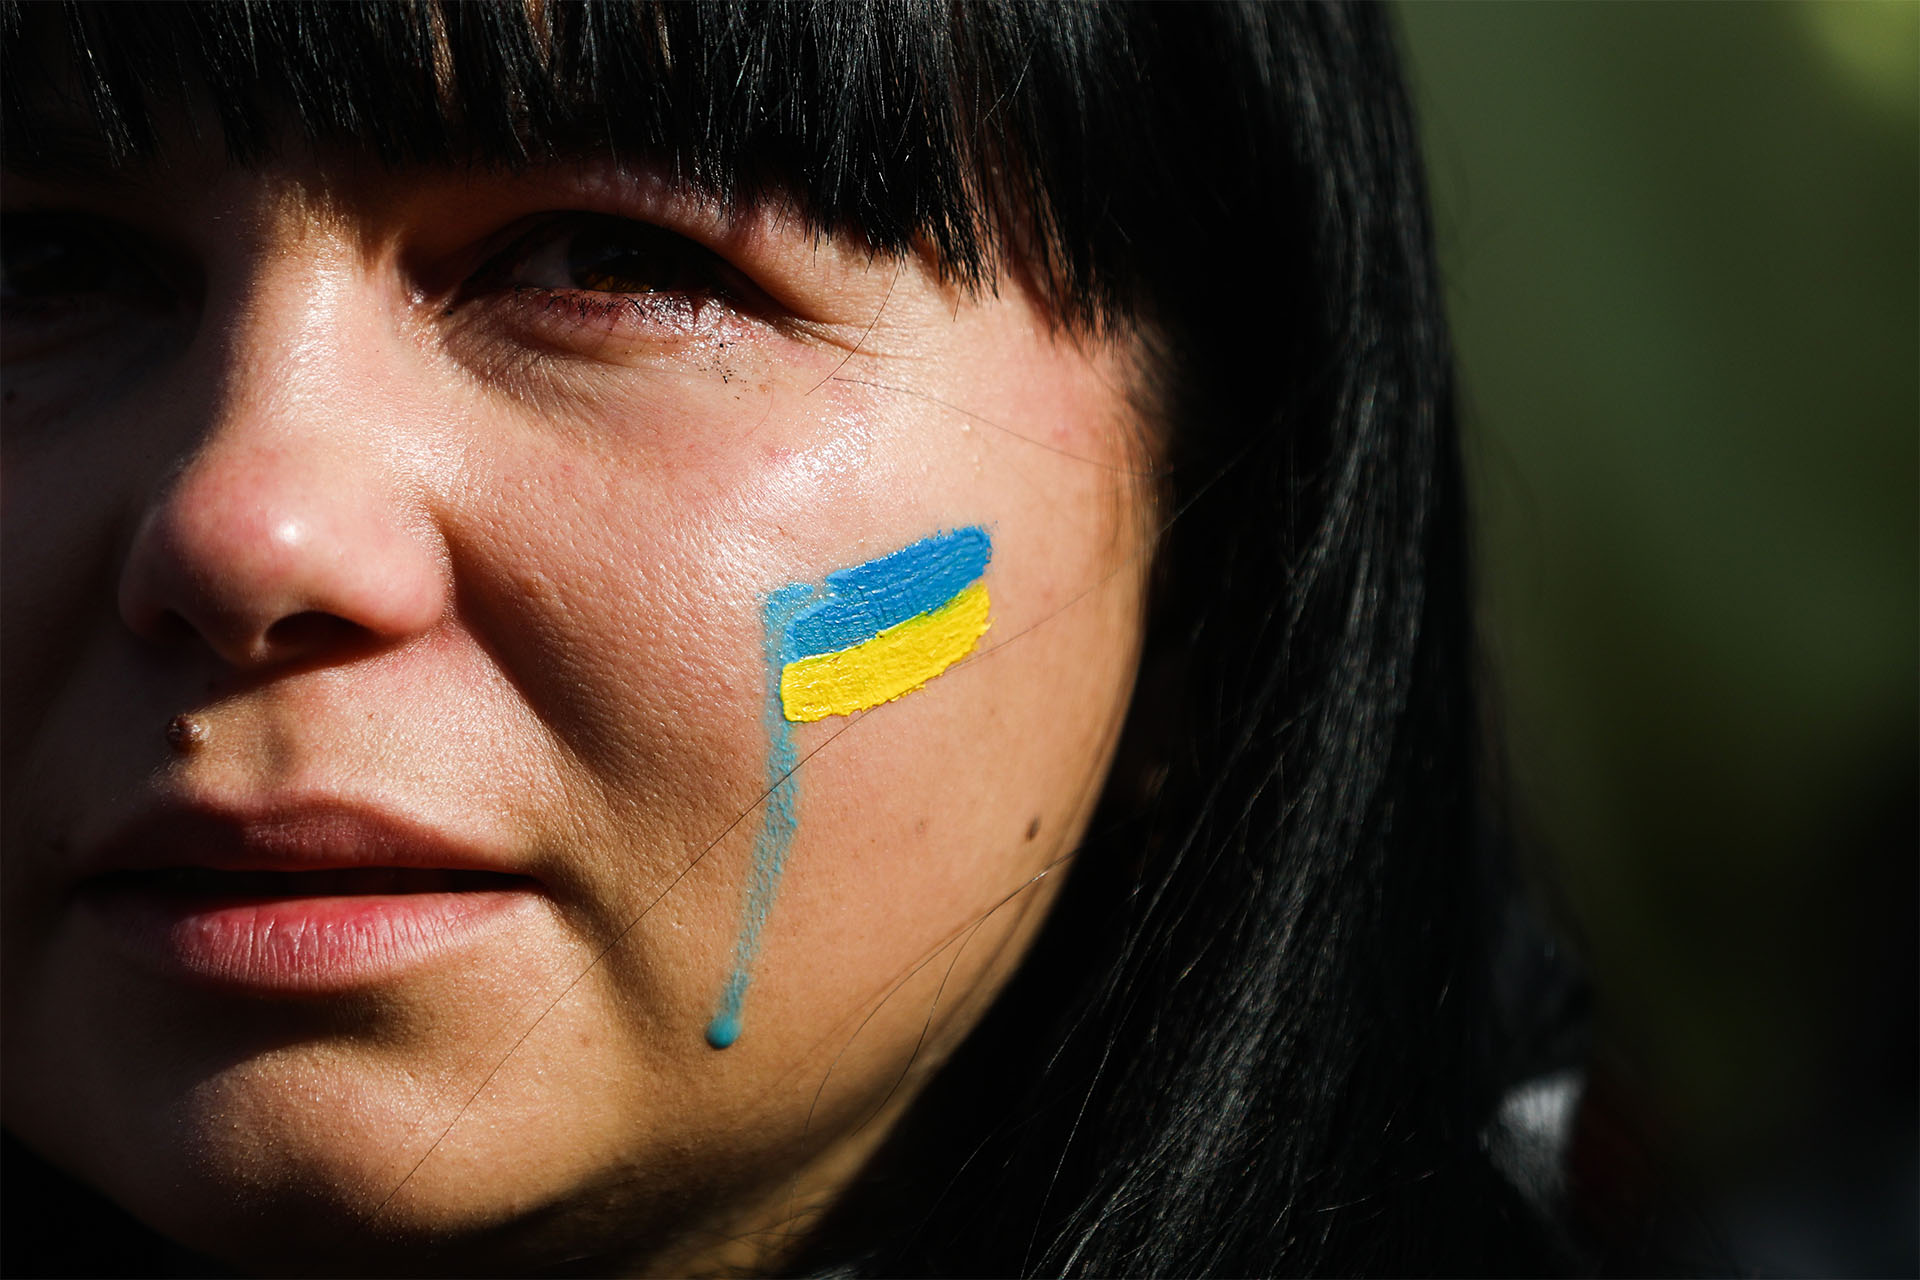 Photo of a woman's face with a tear smearing a painted Ukrainian flag on her cheek